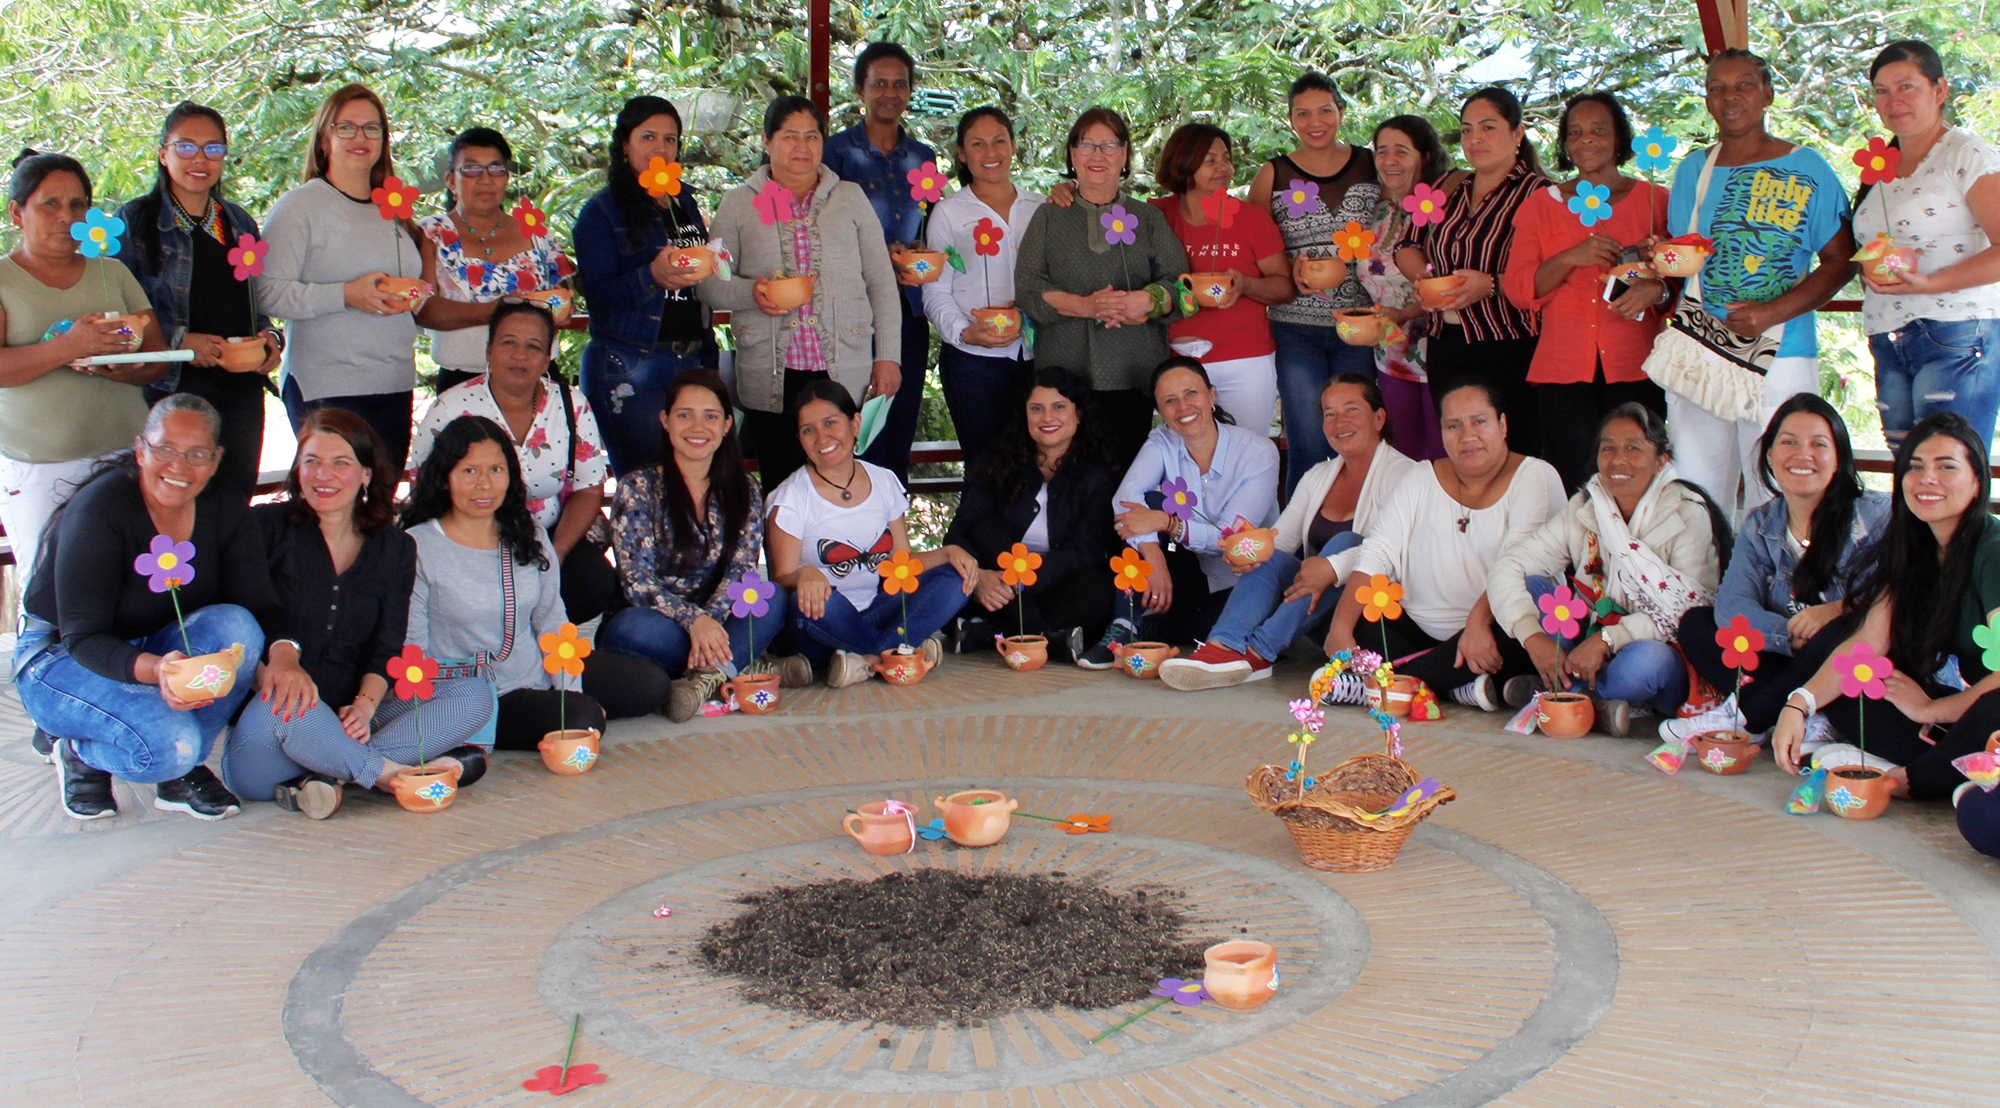 Peace Table in Colombia: “Let us move together towards the truth”